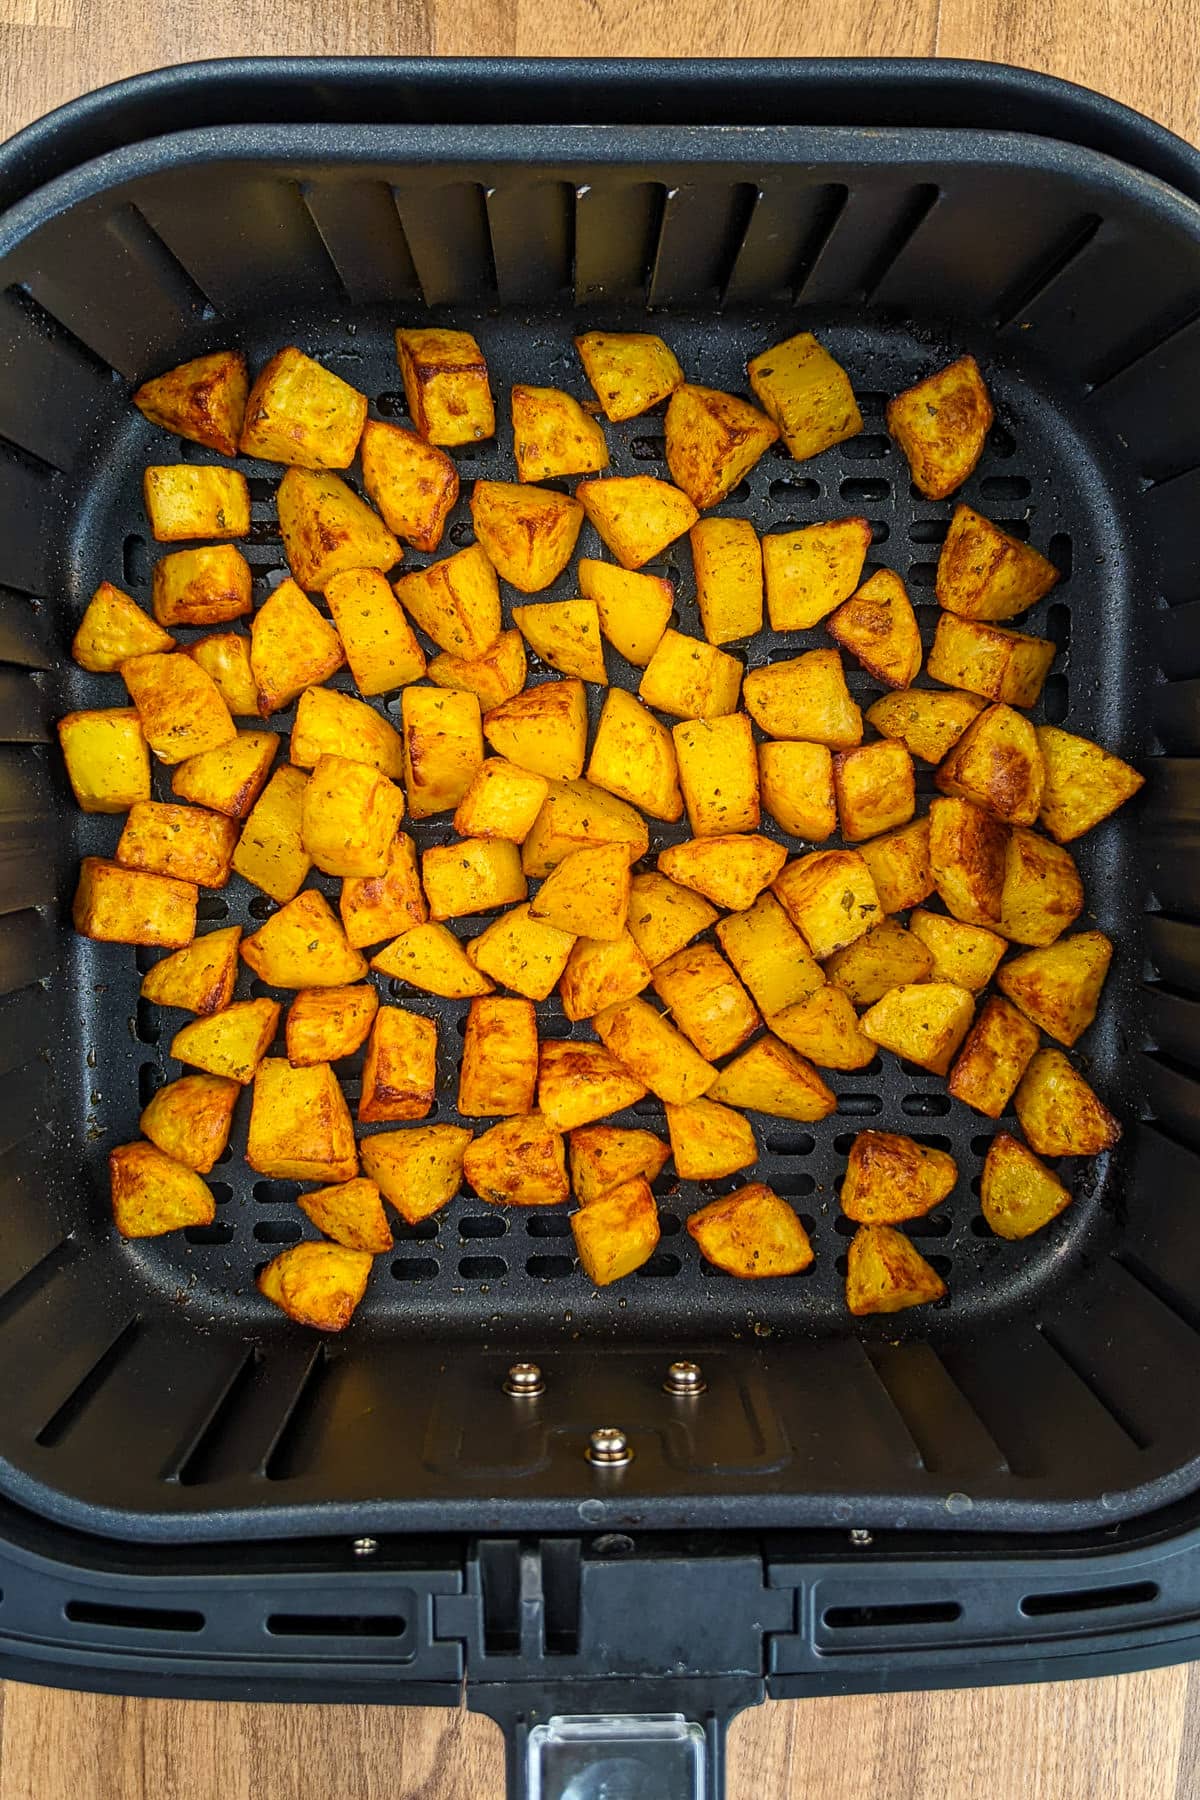 Top view of roasted diced potatoes in an air fryer basket.